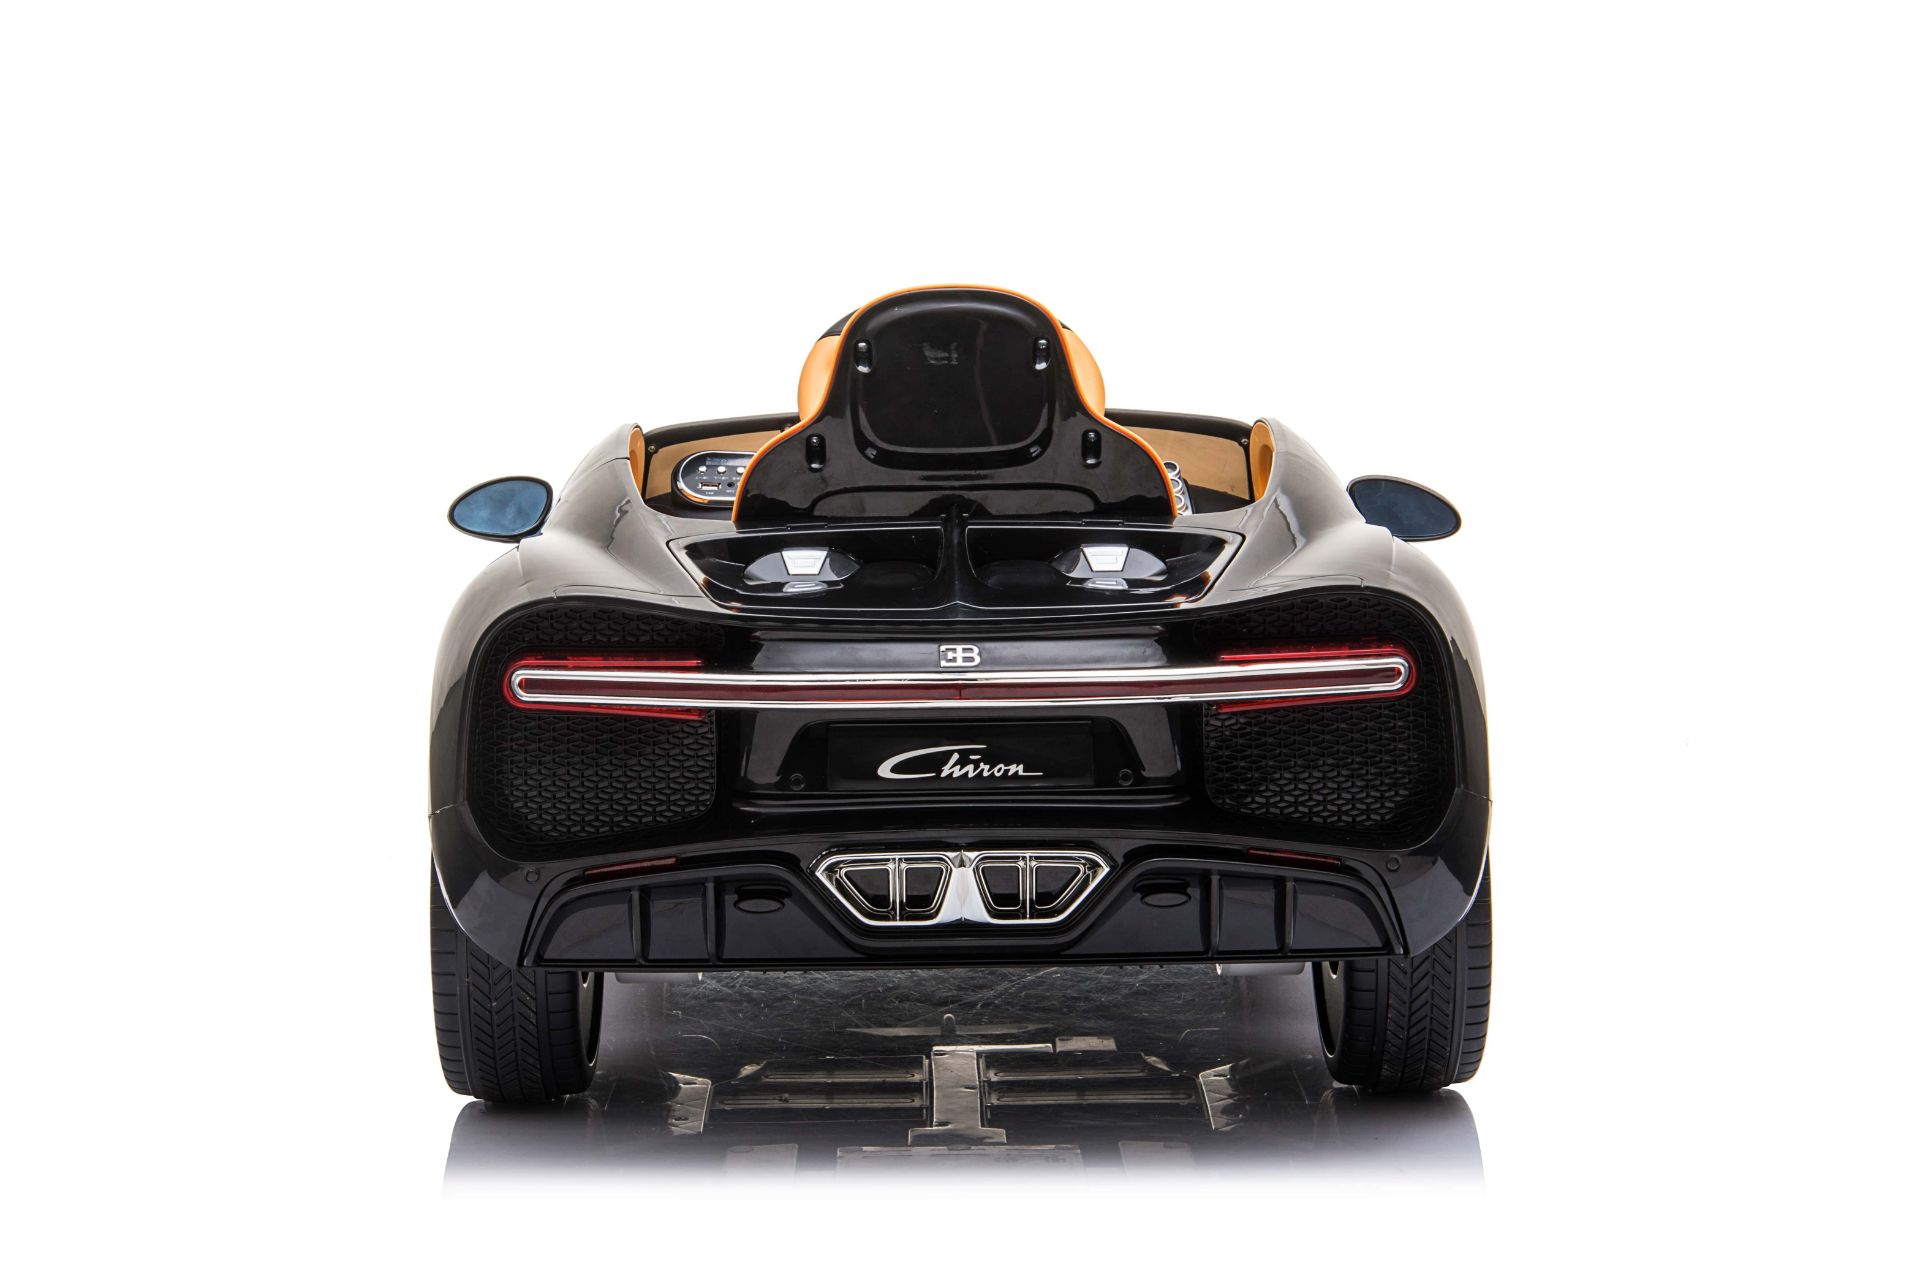 RIDE ON FULLY LICENCED BUGATTI CHIRON 12V WITH PARENTAL REMOTE CONTROL - BLACK - Image 4 of 7